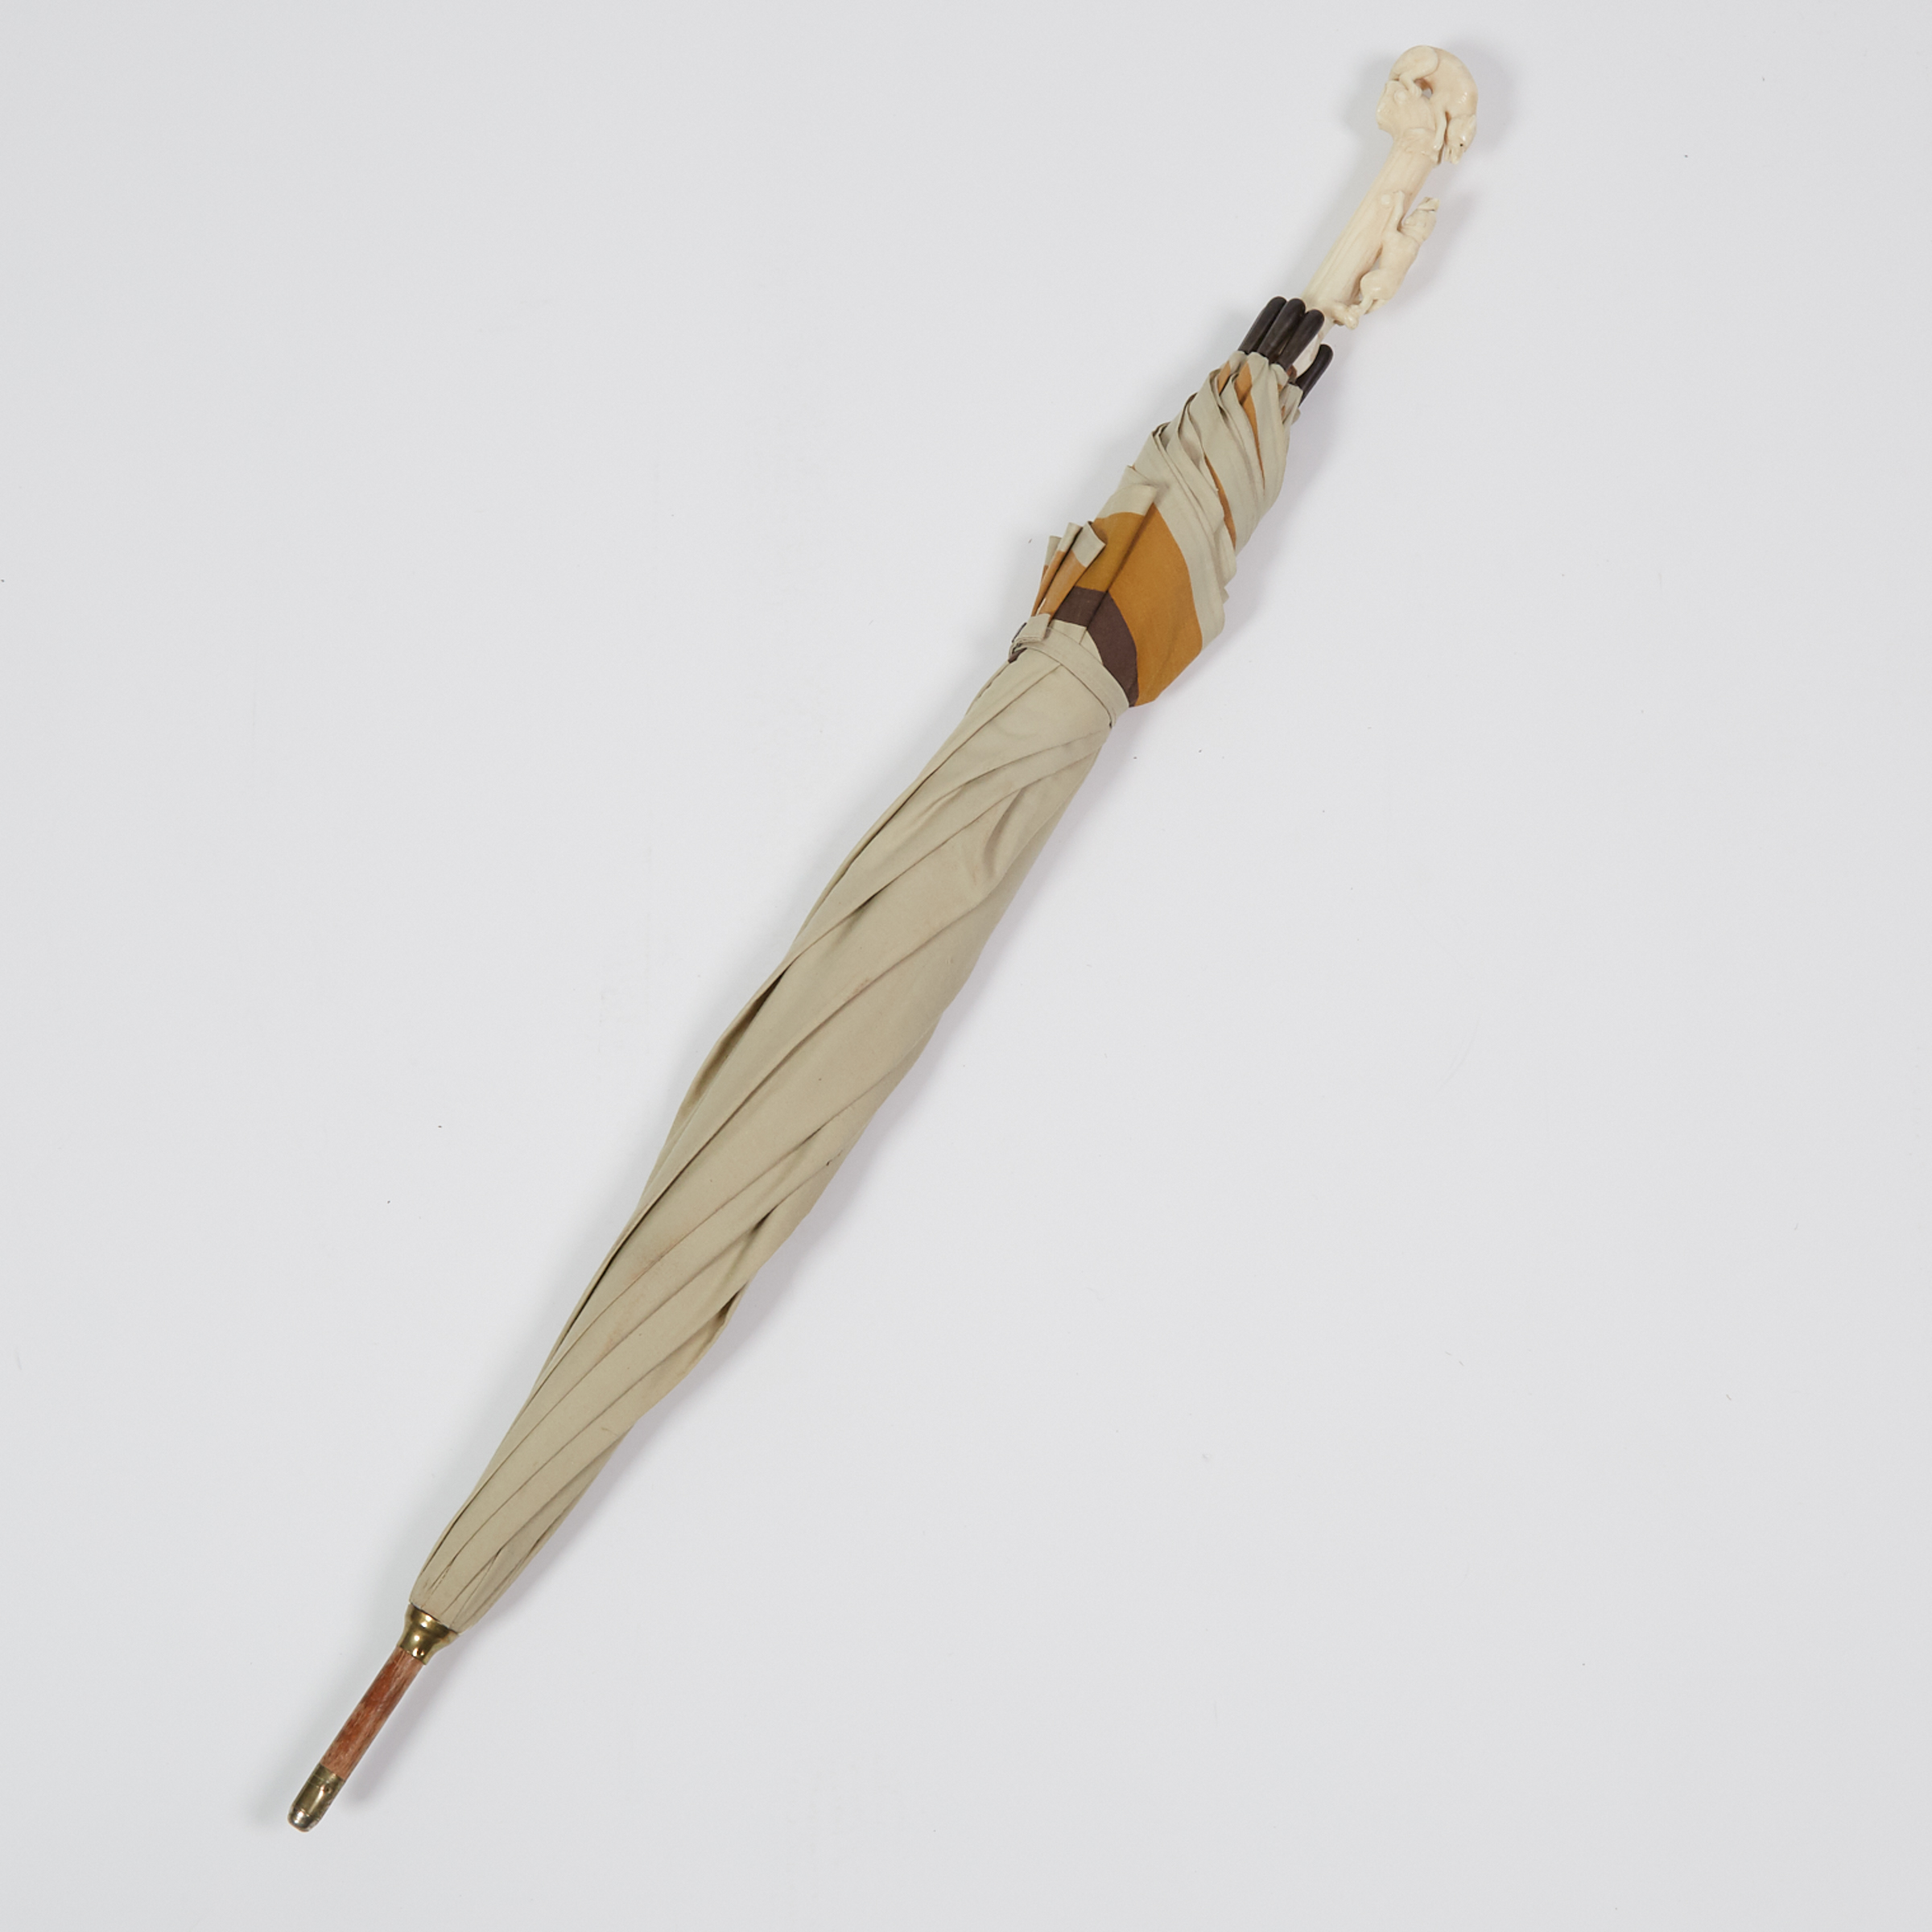 Gentleman's Umbrella with Carved Bone Dog Versus Wolf Form Handle, 19th century and later